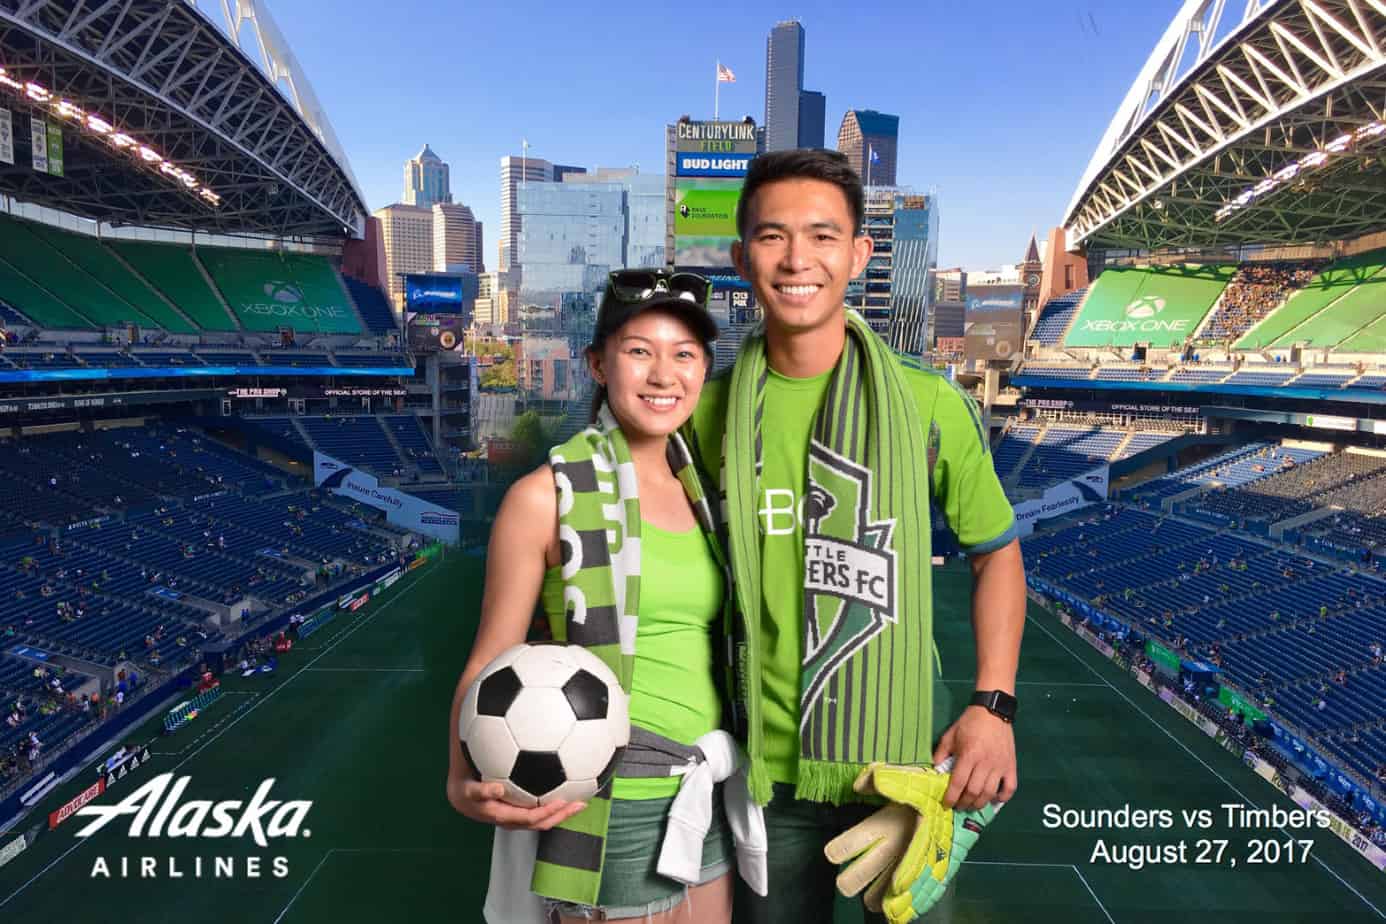 Man and a Women posing at Century Link field in Seattle during a soccer match.